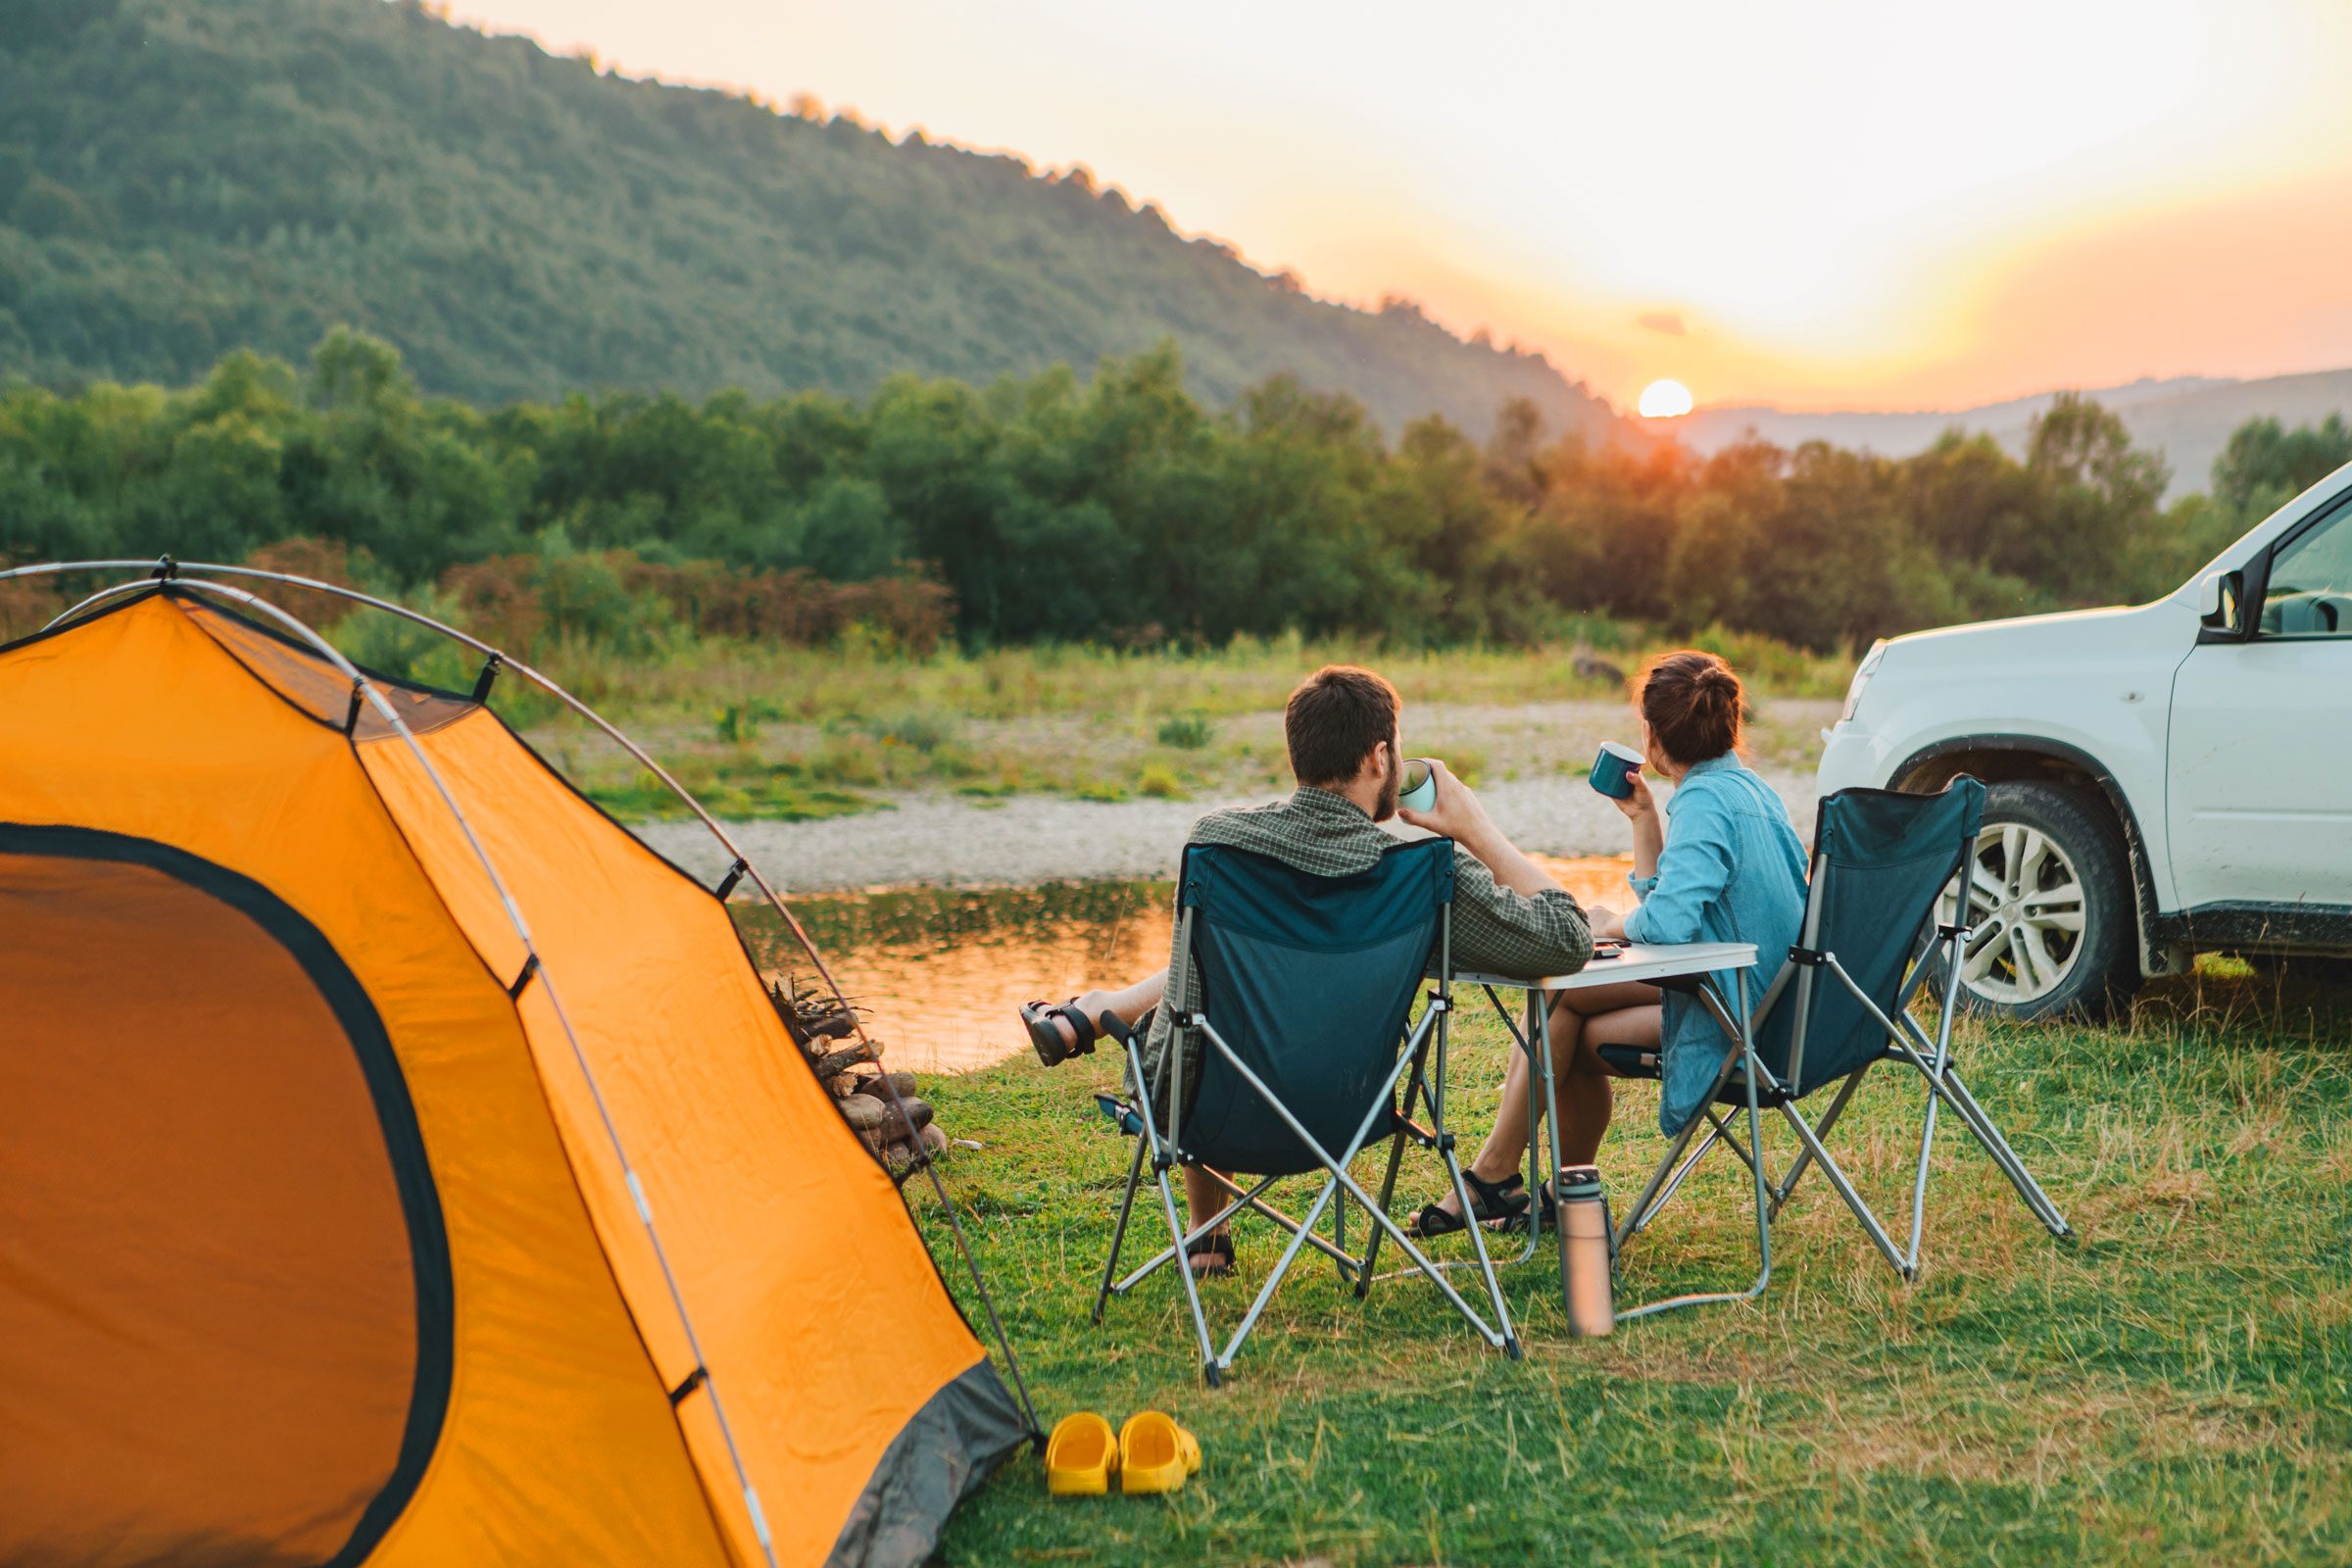 10 Rude Camping Habits You Need to Stop—and What to Do Instead